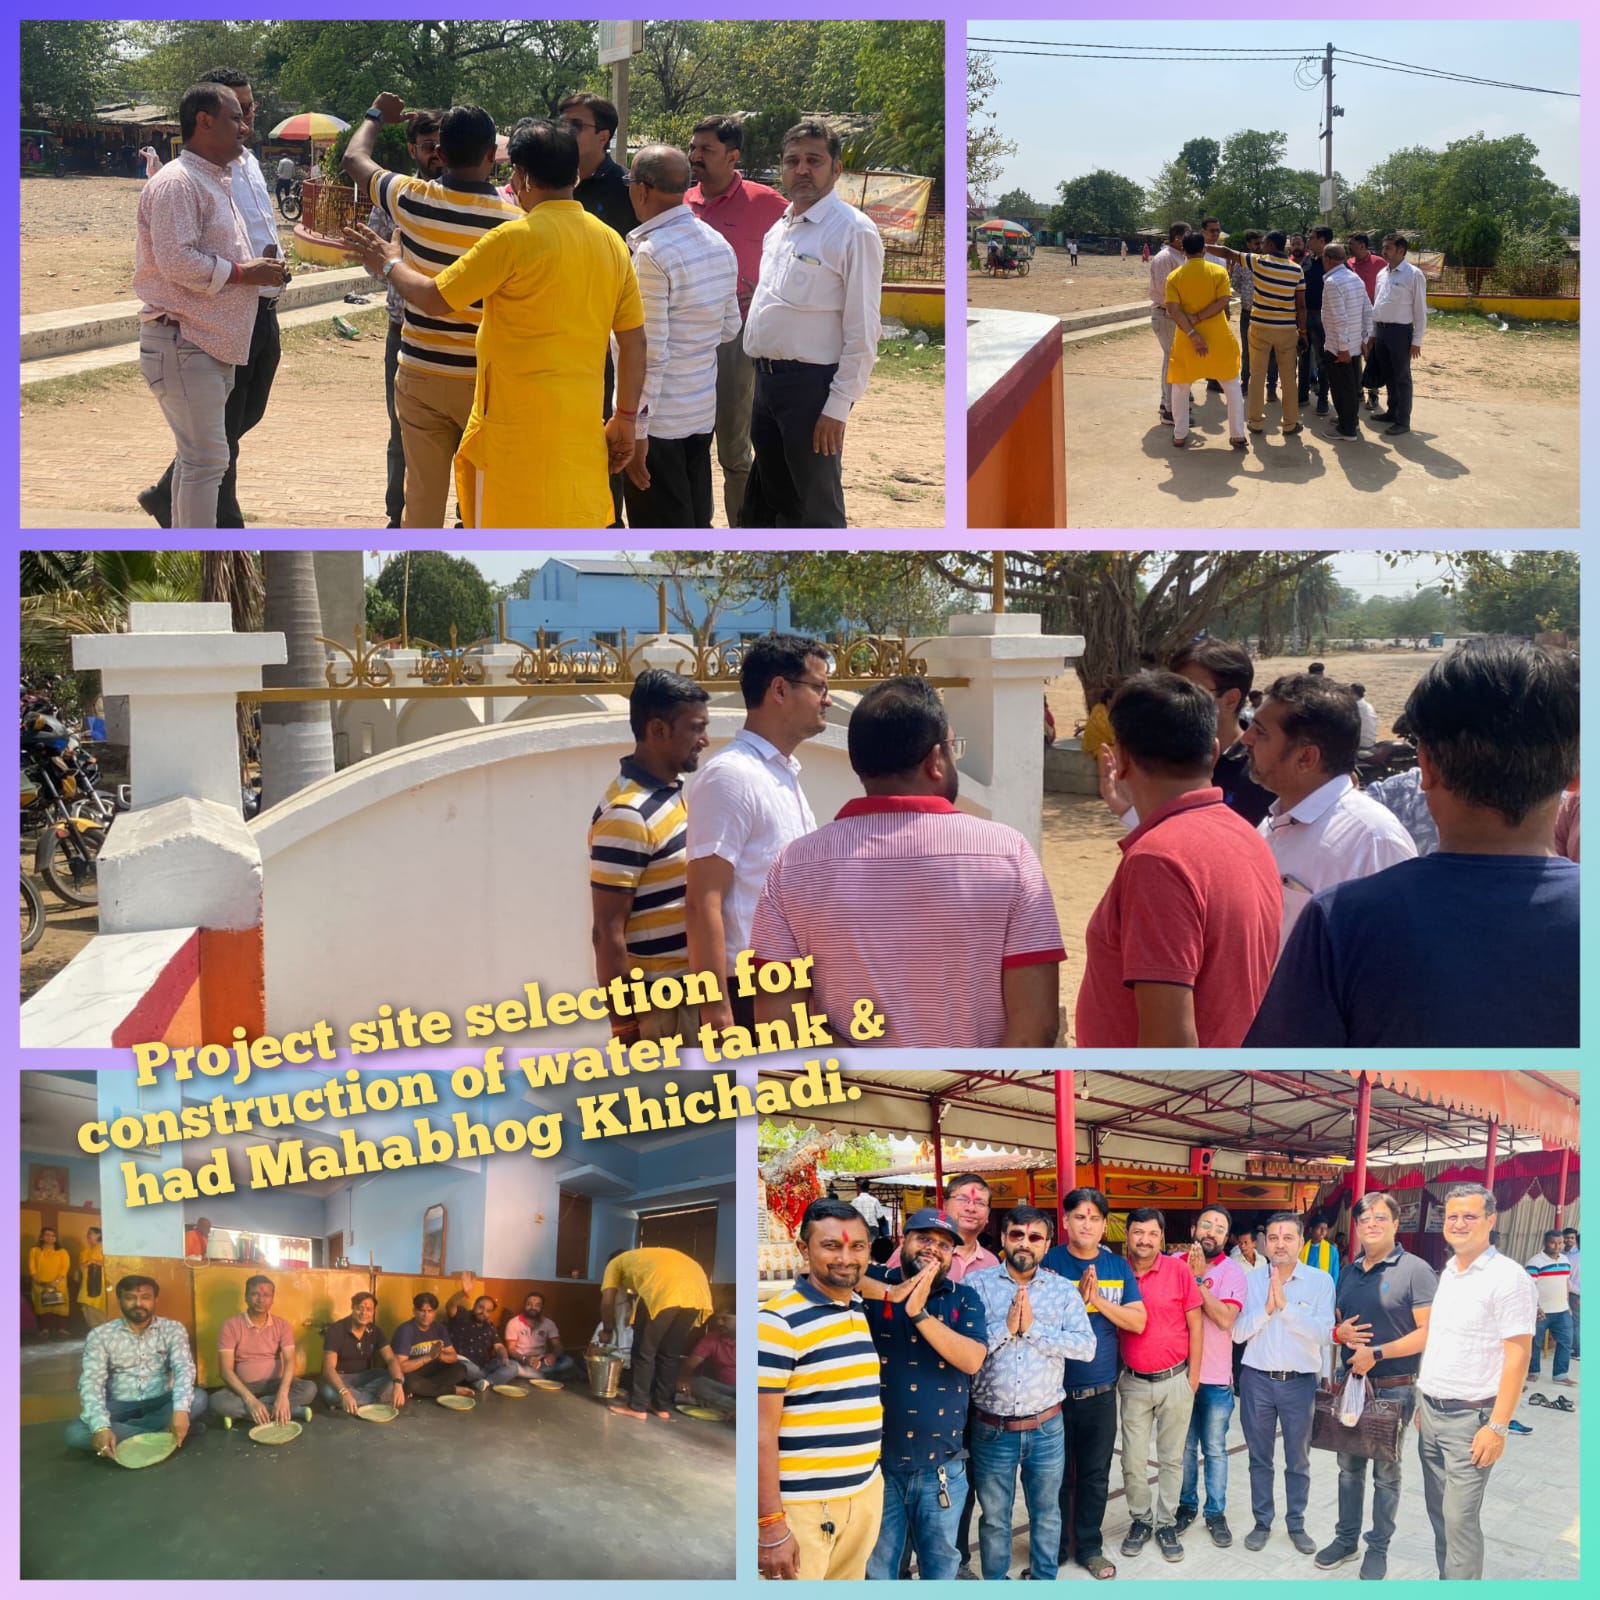 Project site visit for construction of an Overhead Tank for Drinking Water at Ghagarburi Mandir.